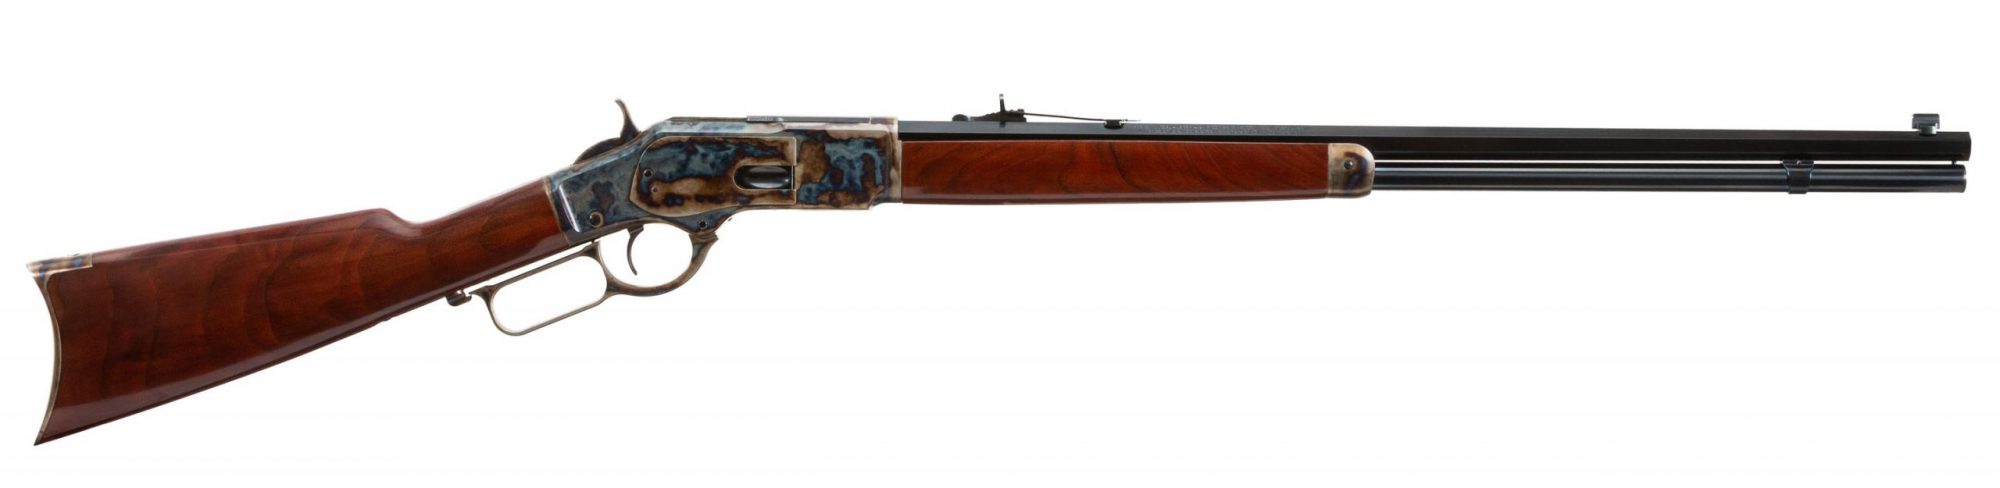 Photo of a new, color case hardened Winchester 1873 rifle, featuring bone charcoal color case hardening by Turnbull Restoration of Bloomfield, NY